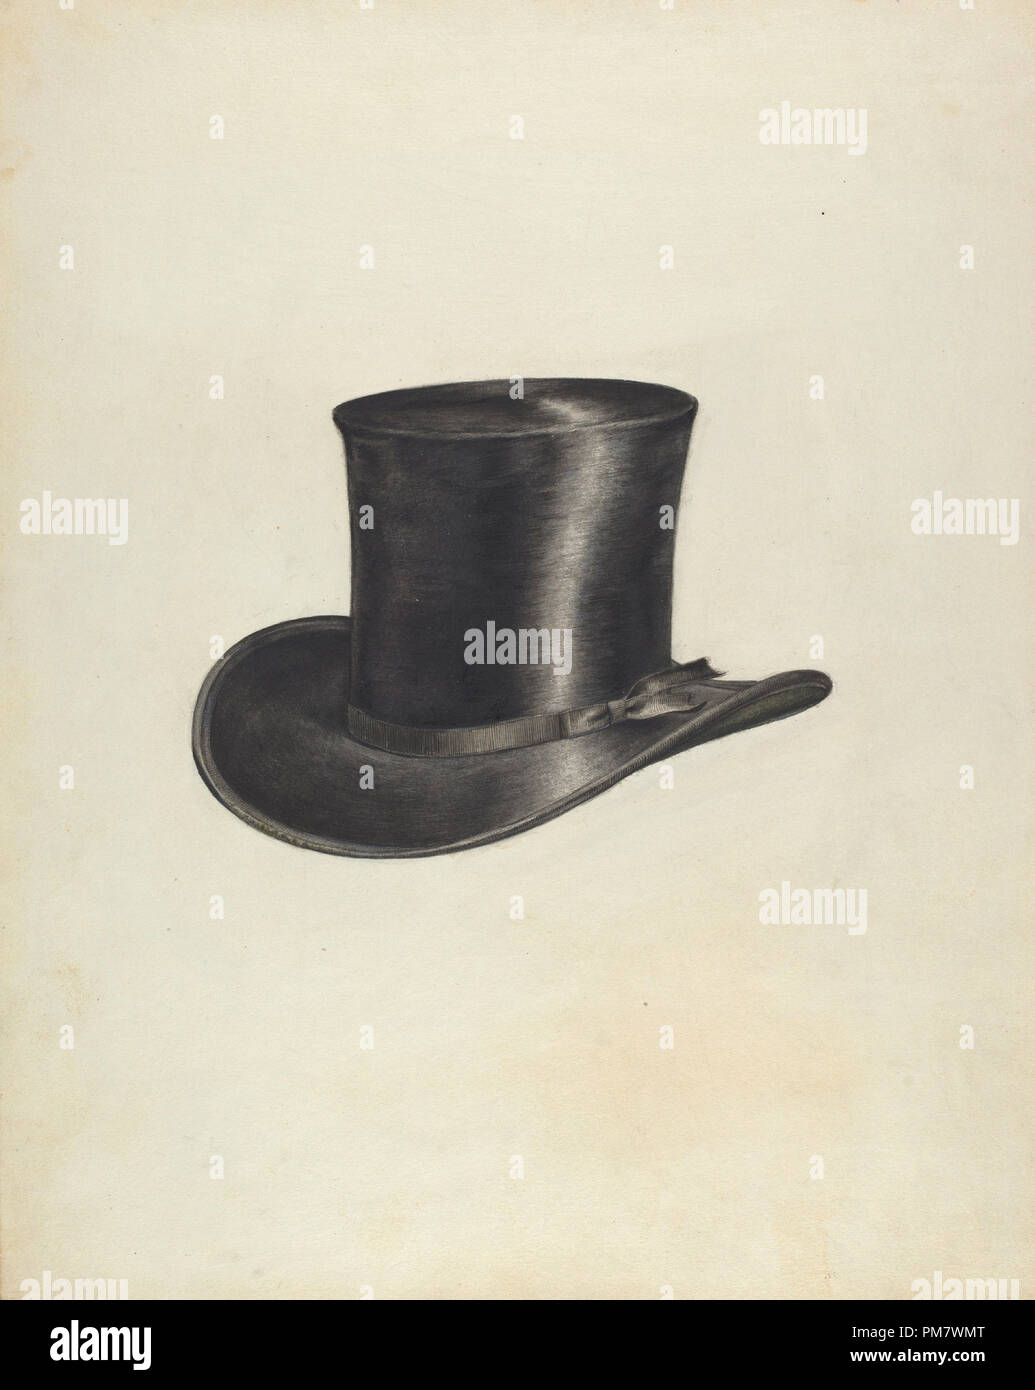 Quaker Man's Hat. Dated: c. 1938. Dimensions: overall: 38 x 30.2 cm (14 15/16 x 11 7/8 in.). Medium: watercolor, graphite, and pen and ink on paperboard. Museum: National Gallery of Art, Washington DC. Author: Henry De Wolfe. Stock Photo